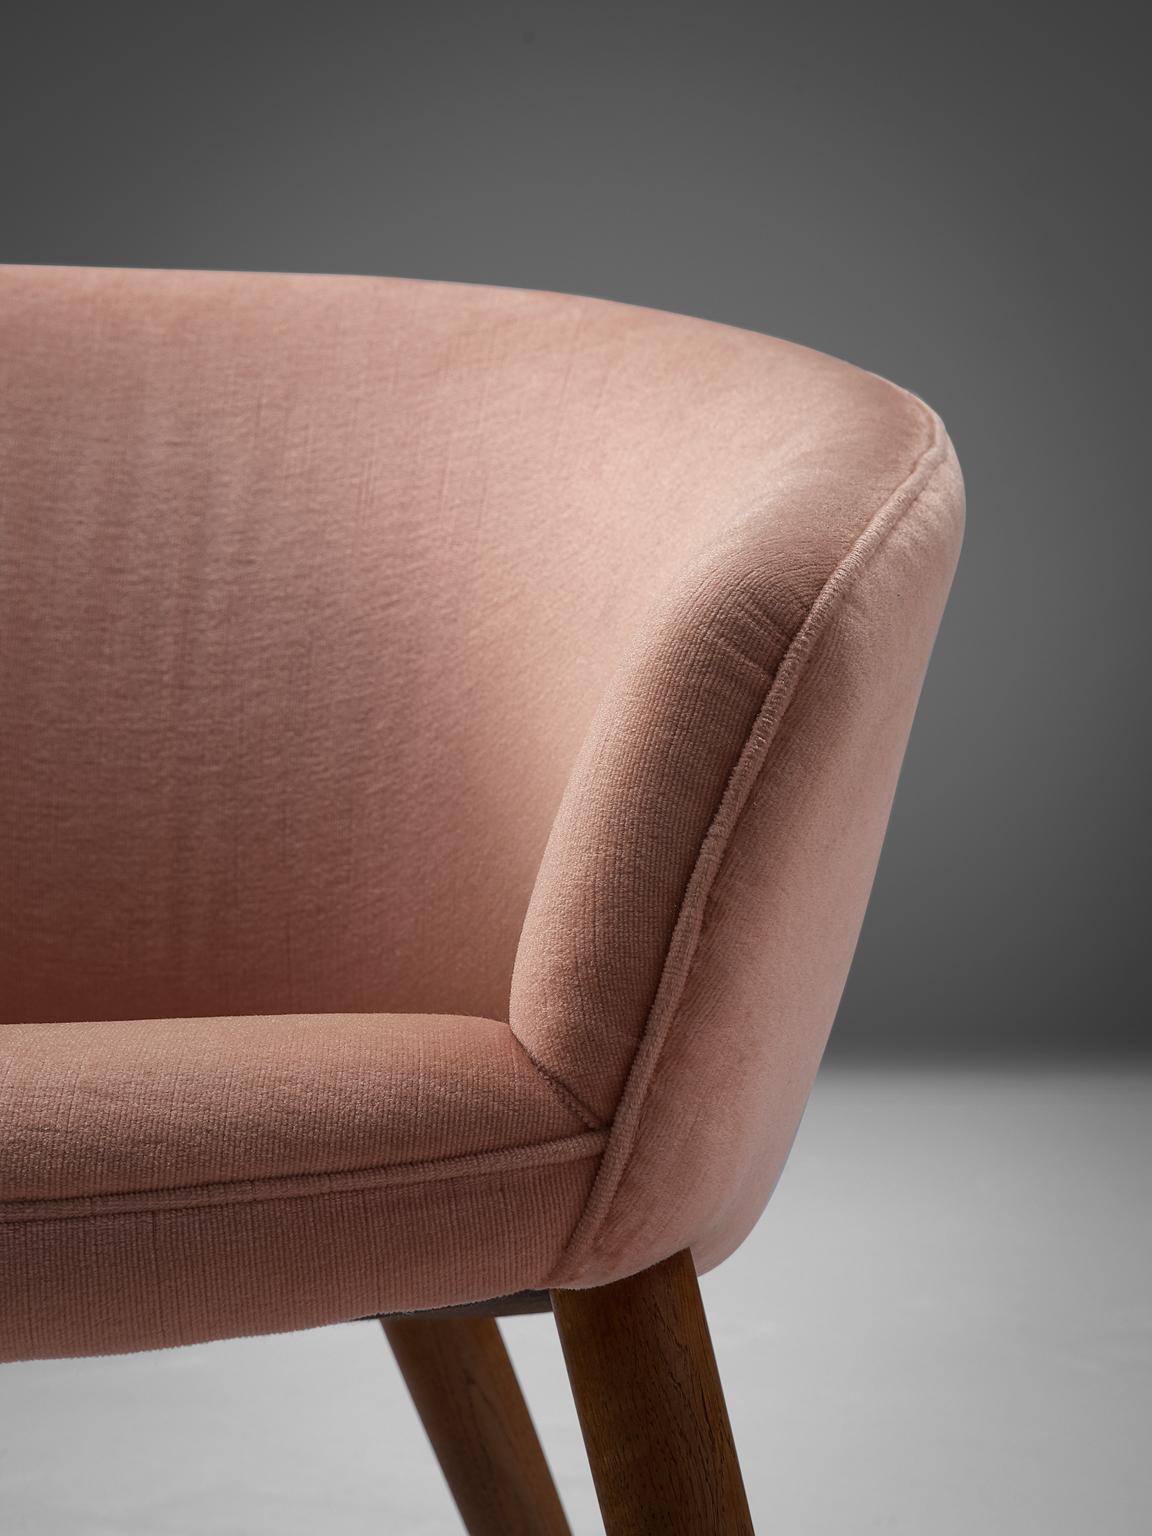 Mid-20th Century Nanna Ditzel Charming Shell Chair in Pink Upholstery